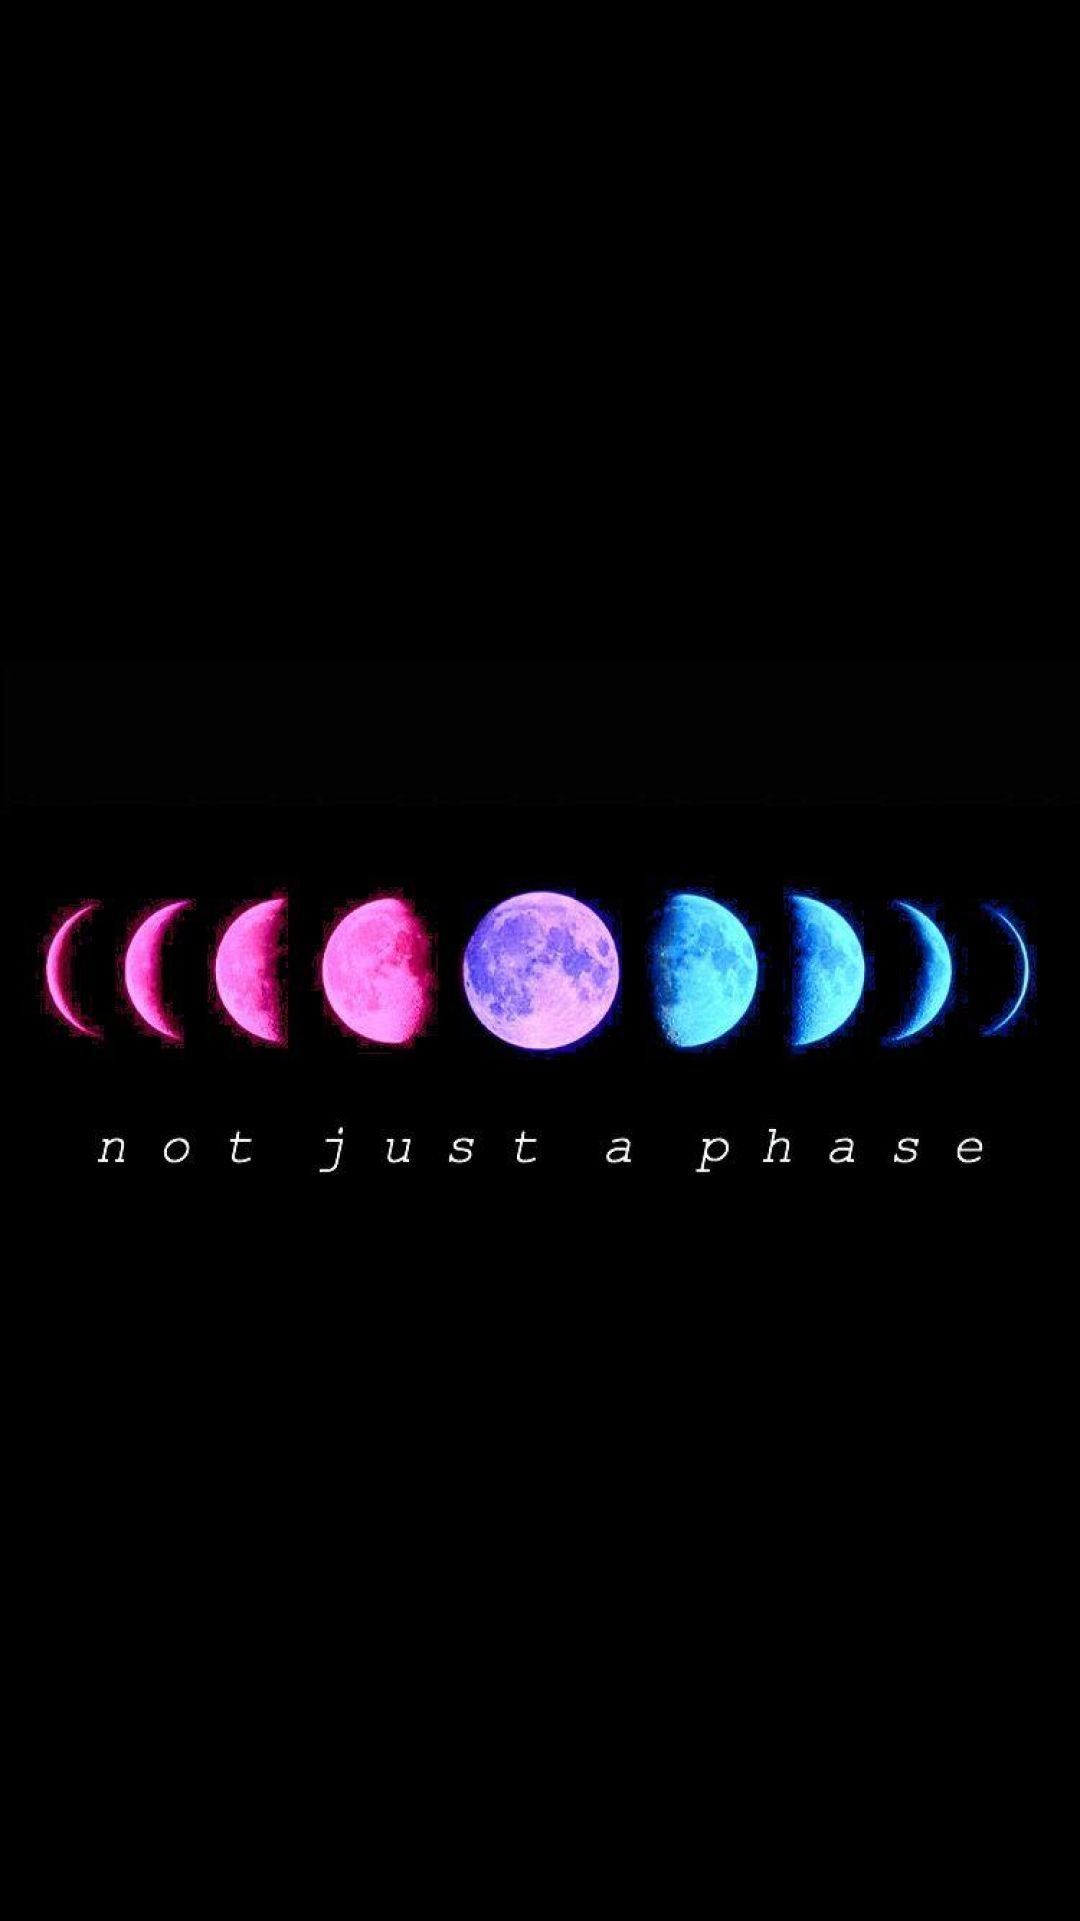 The phases of a moon with different colors - Non binary